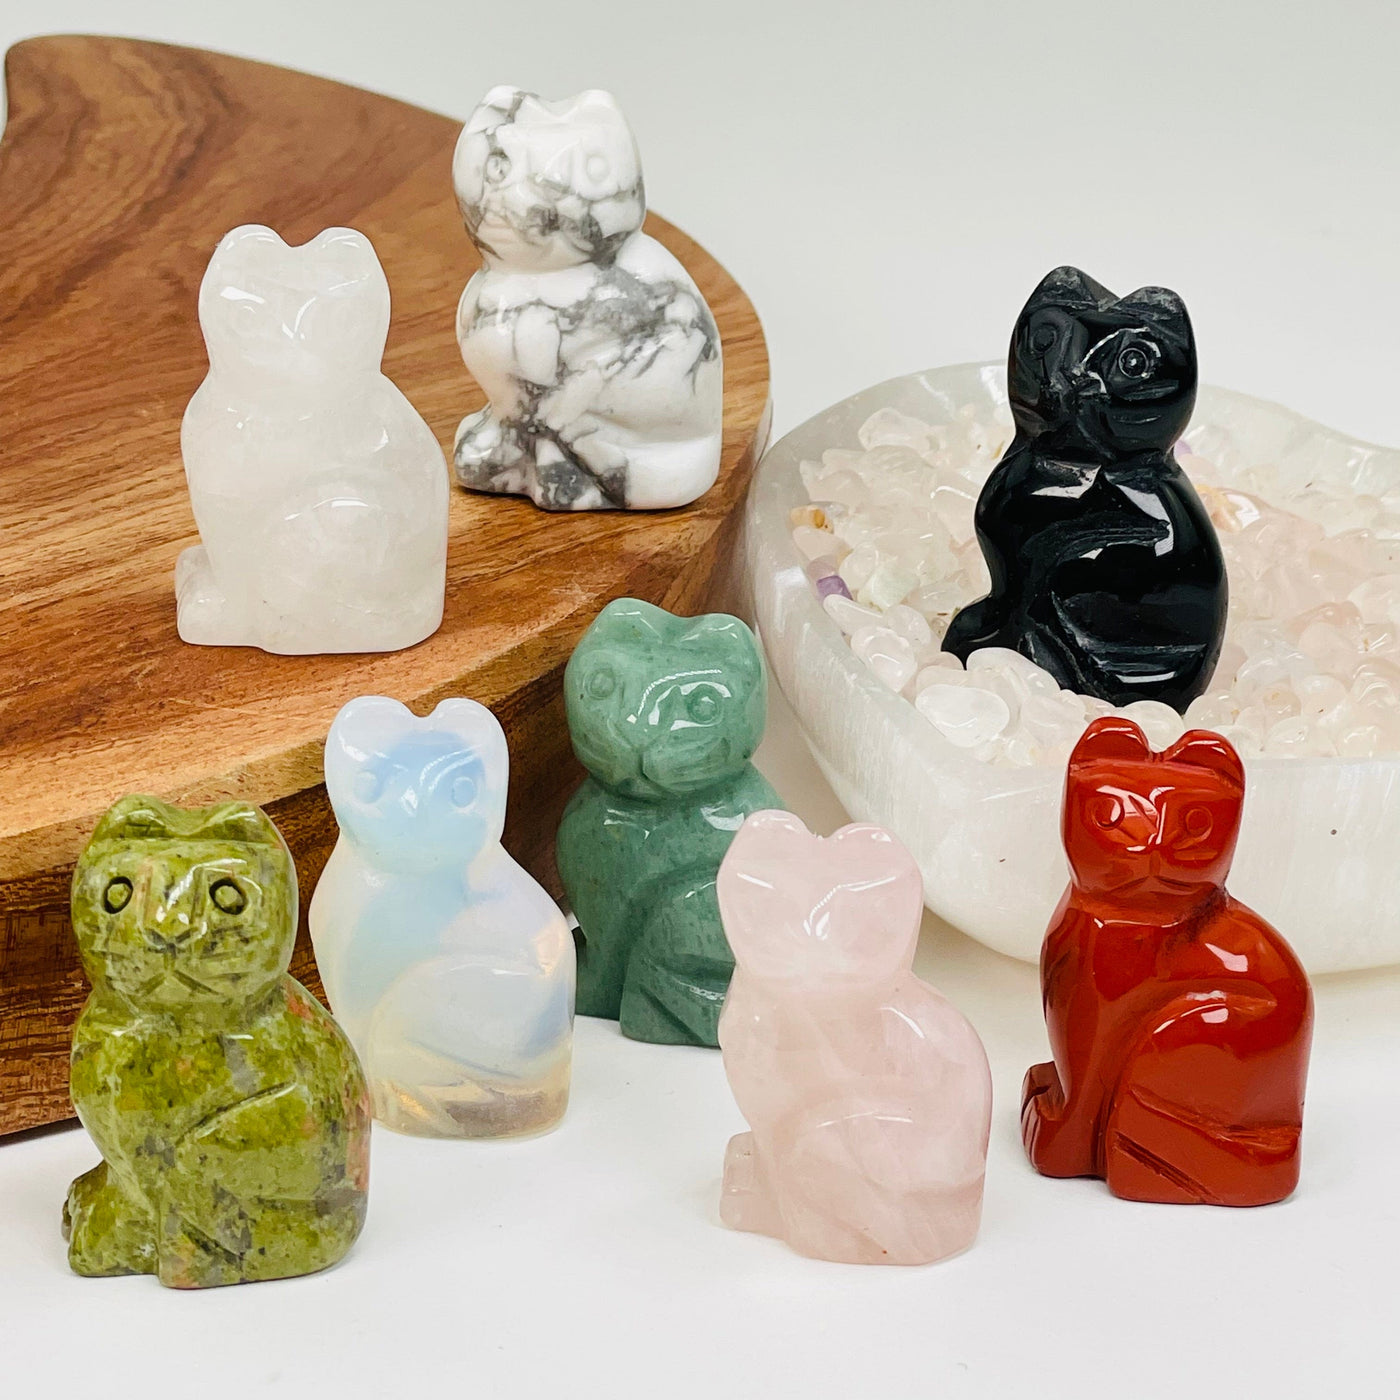 gemstone cats displayed as home decor 